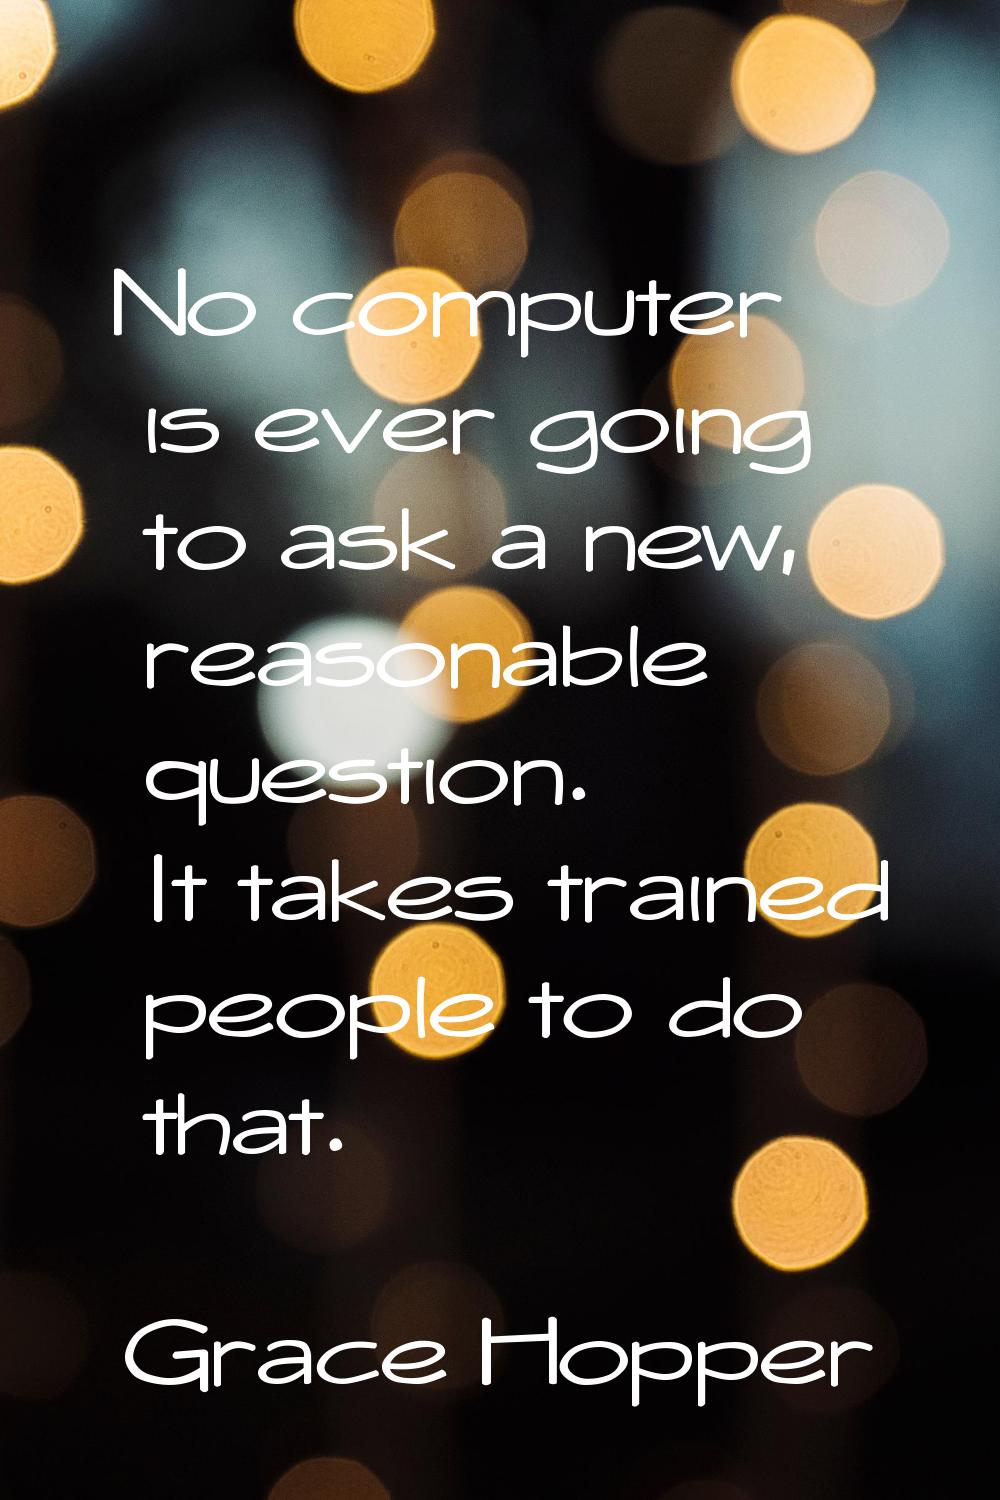 No computer is ever going to ask a new, reasonable question. It takes trained people to do that.